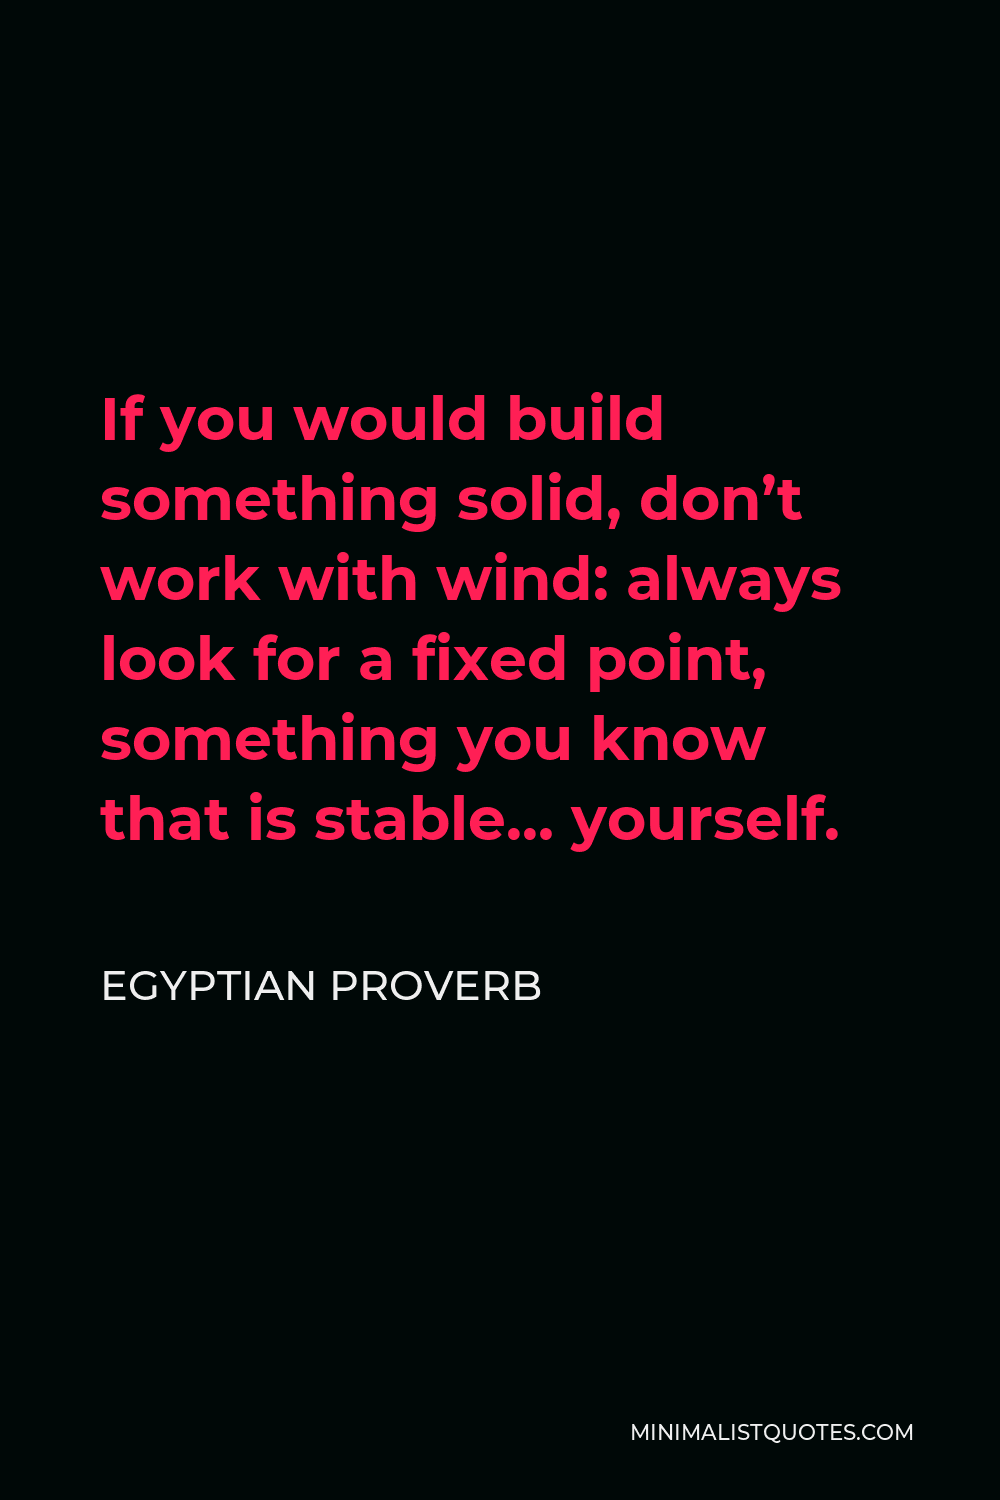 Egyptian Proverb Quote - If you would build something solid, don’t work with wind: always look for a fixed point, something you know that is stable… yourself.